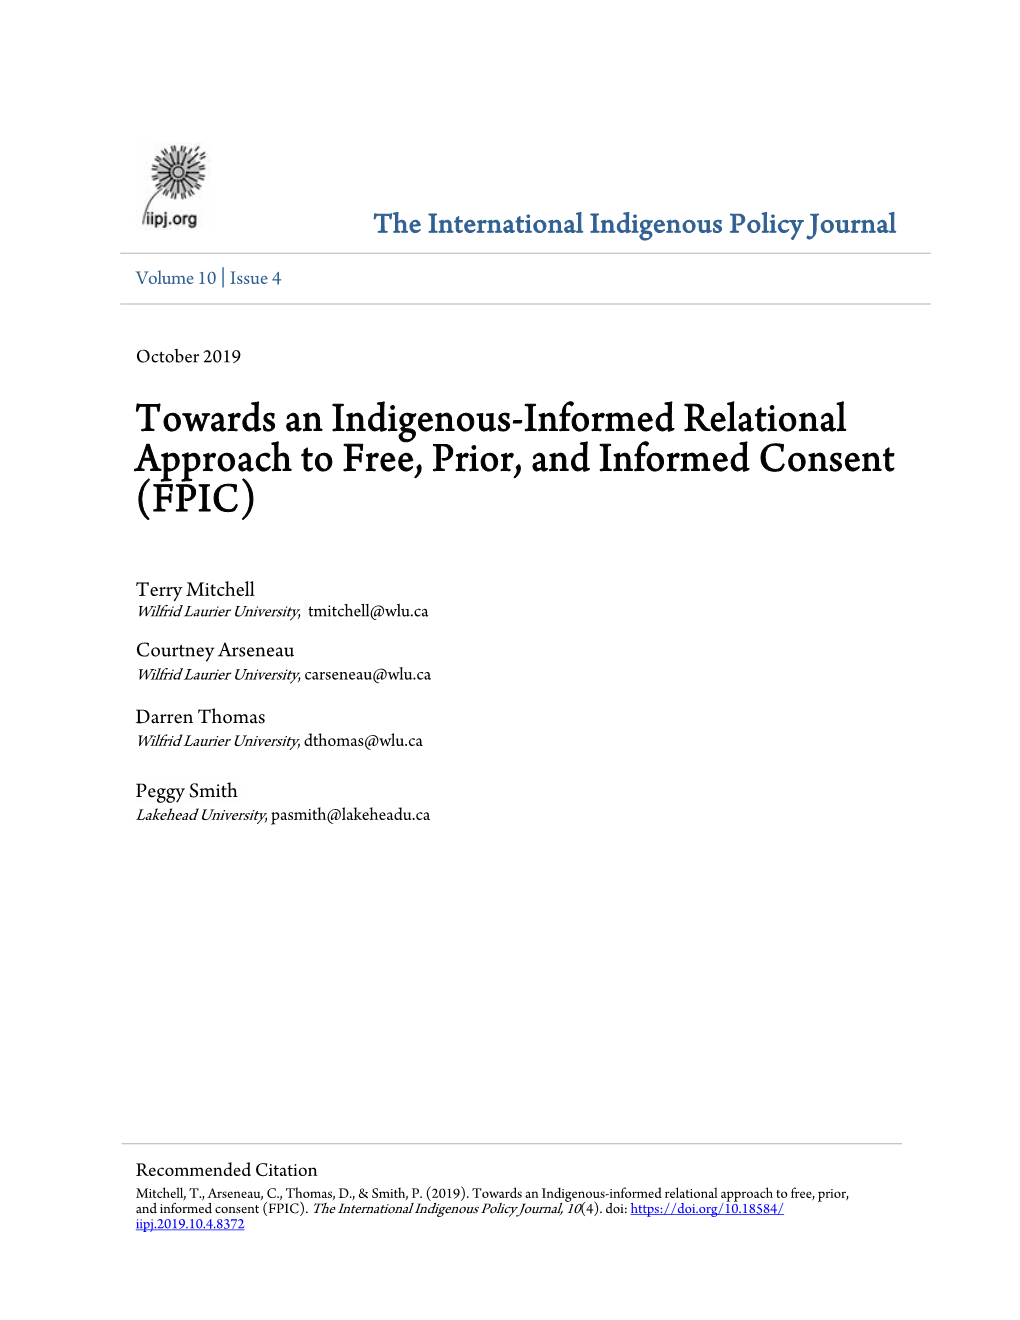 Towards an Indigenous-Informed Relational Approach to Free, Prior, and Informed Consent (FPIC)